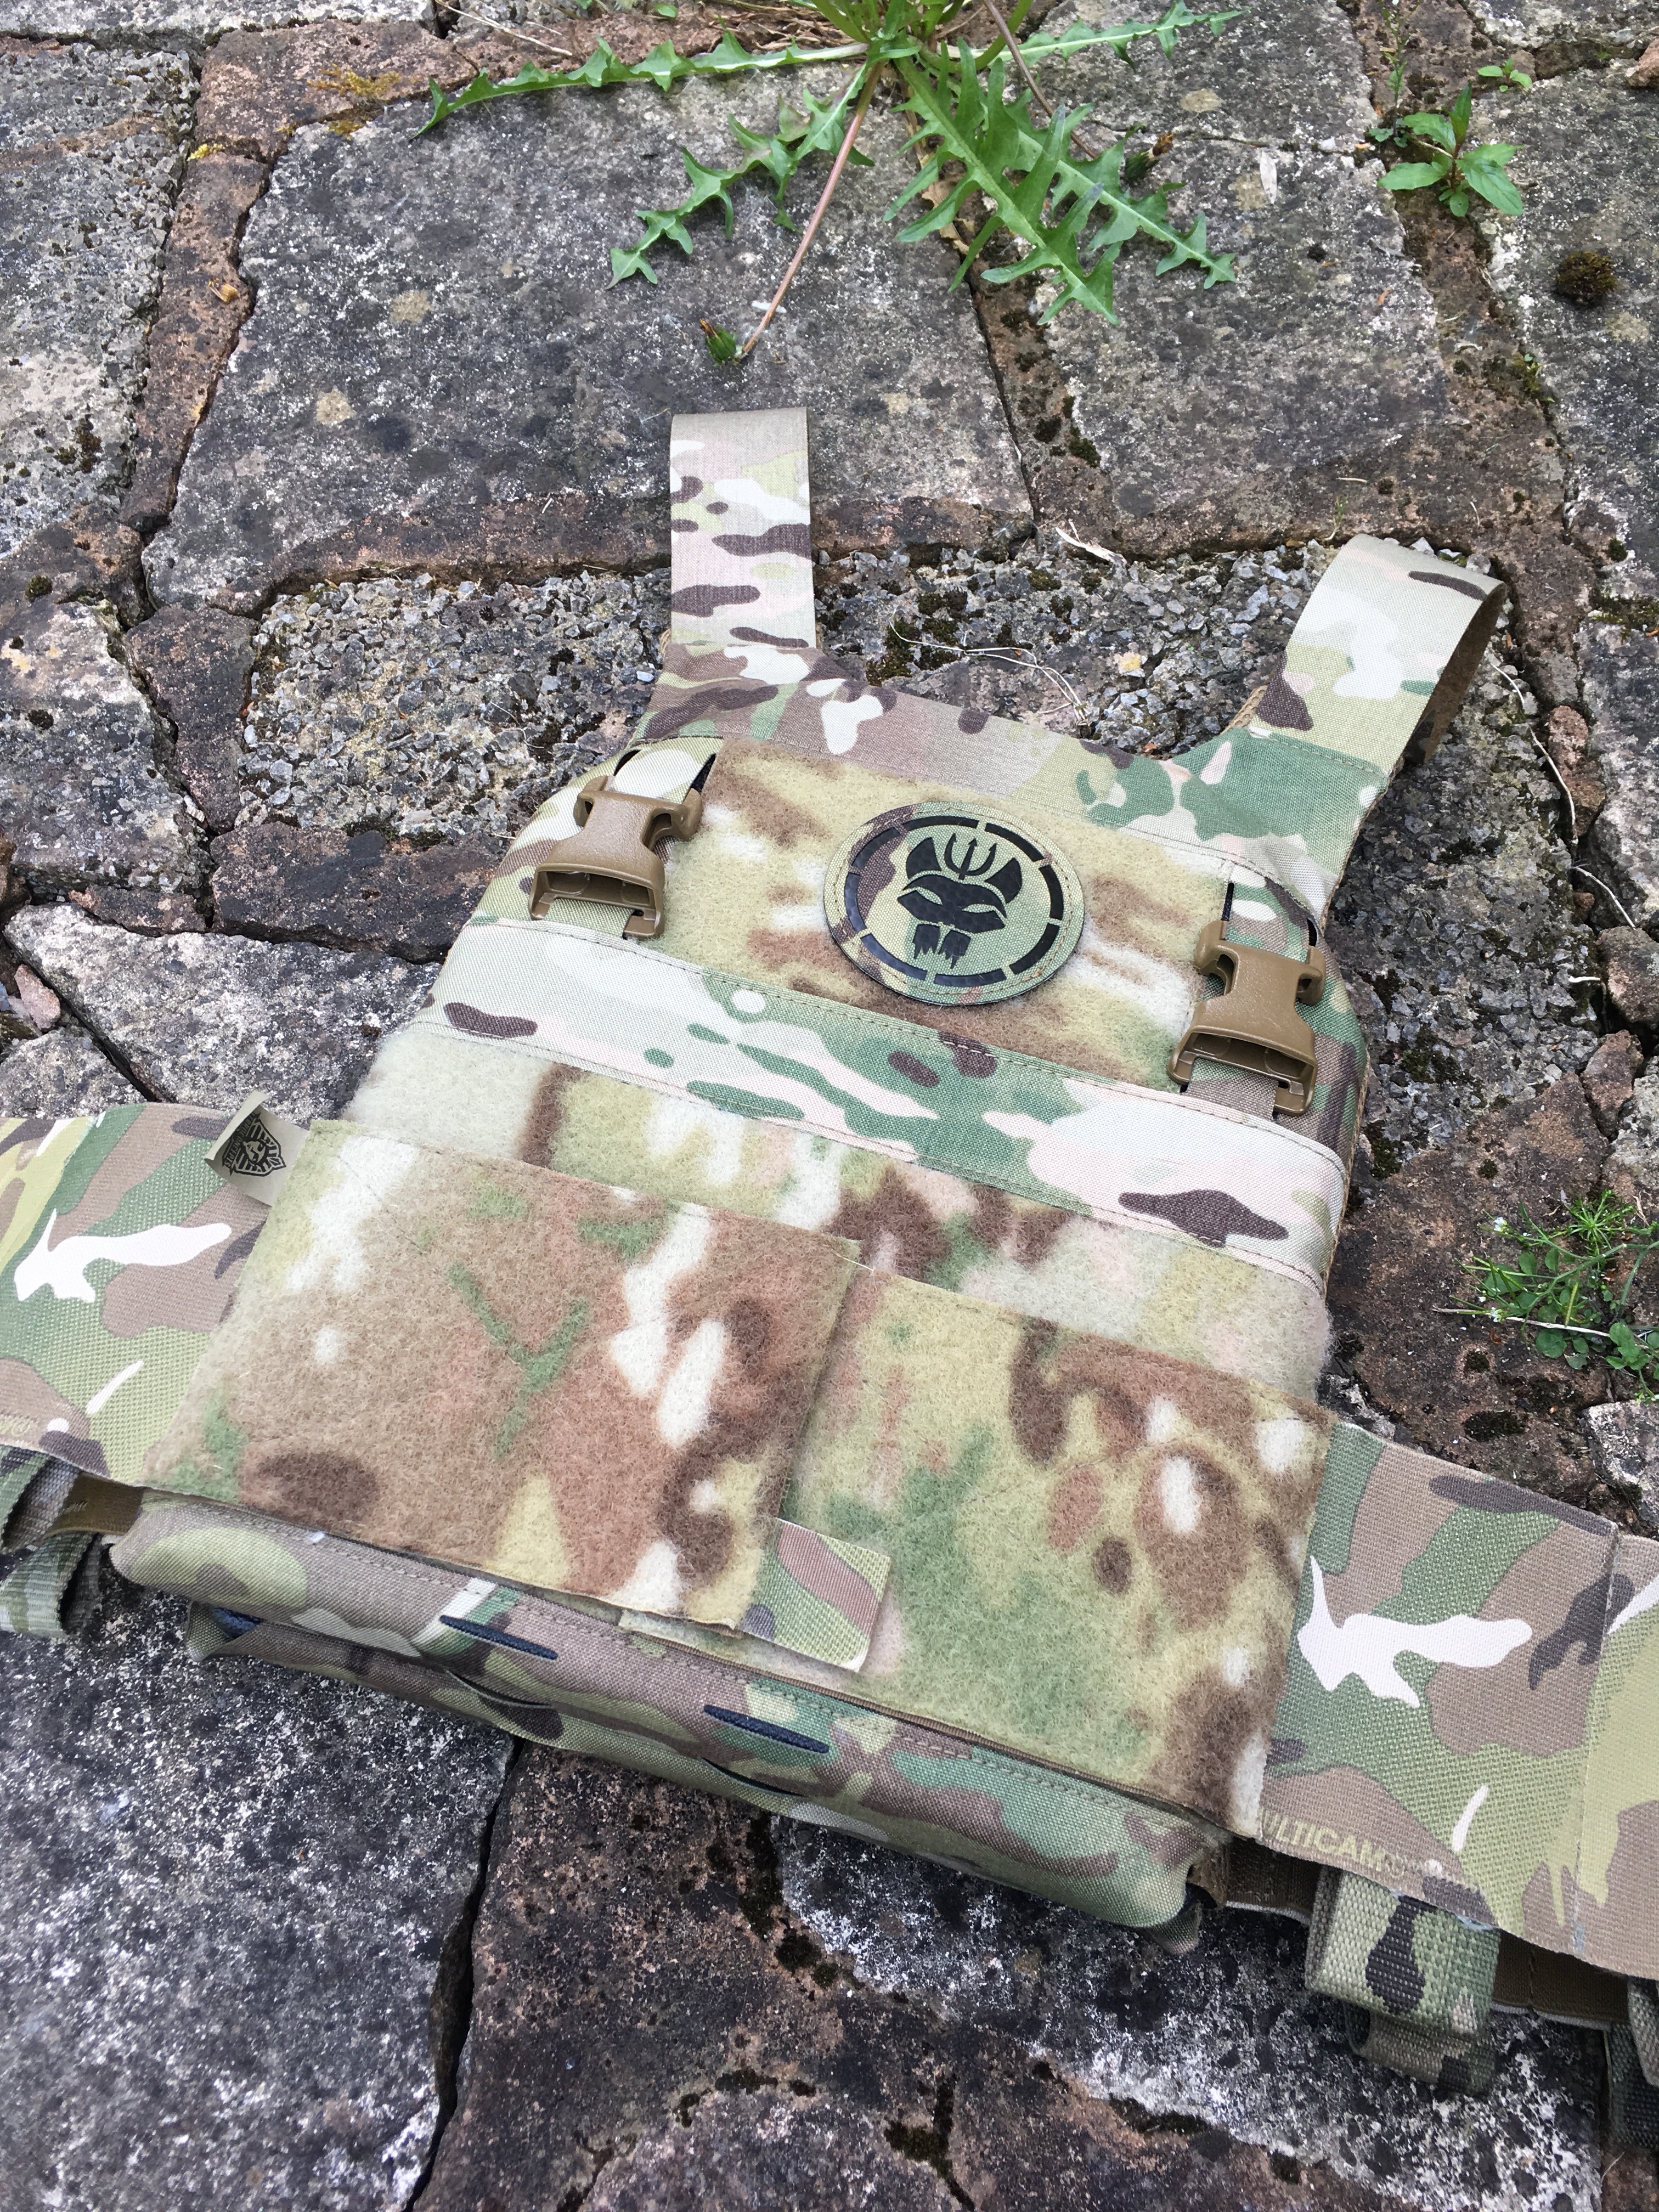 Plate Carrier Review – Ferro Concepts Slickster – ATRG